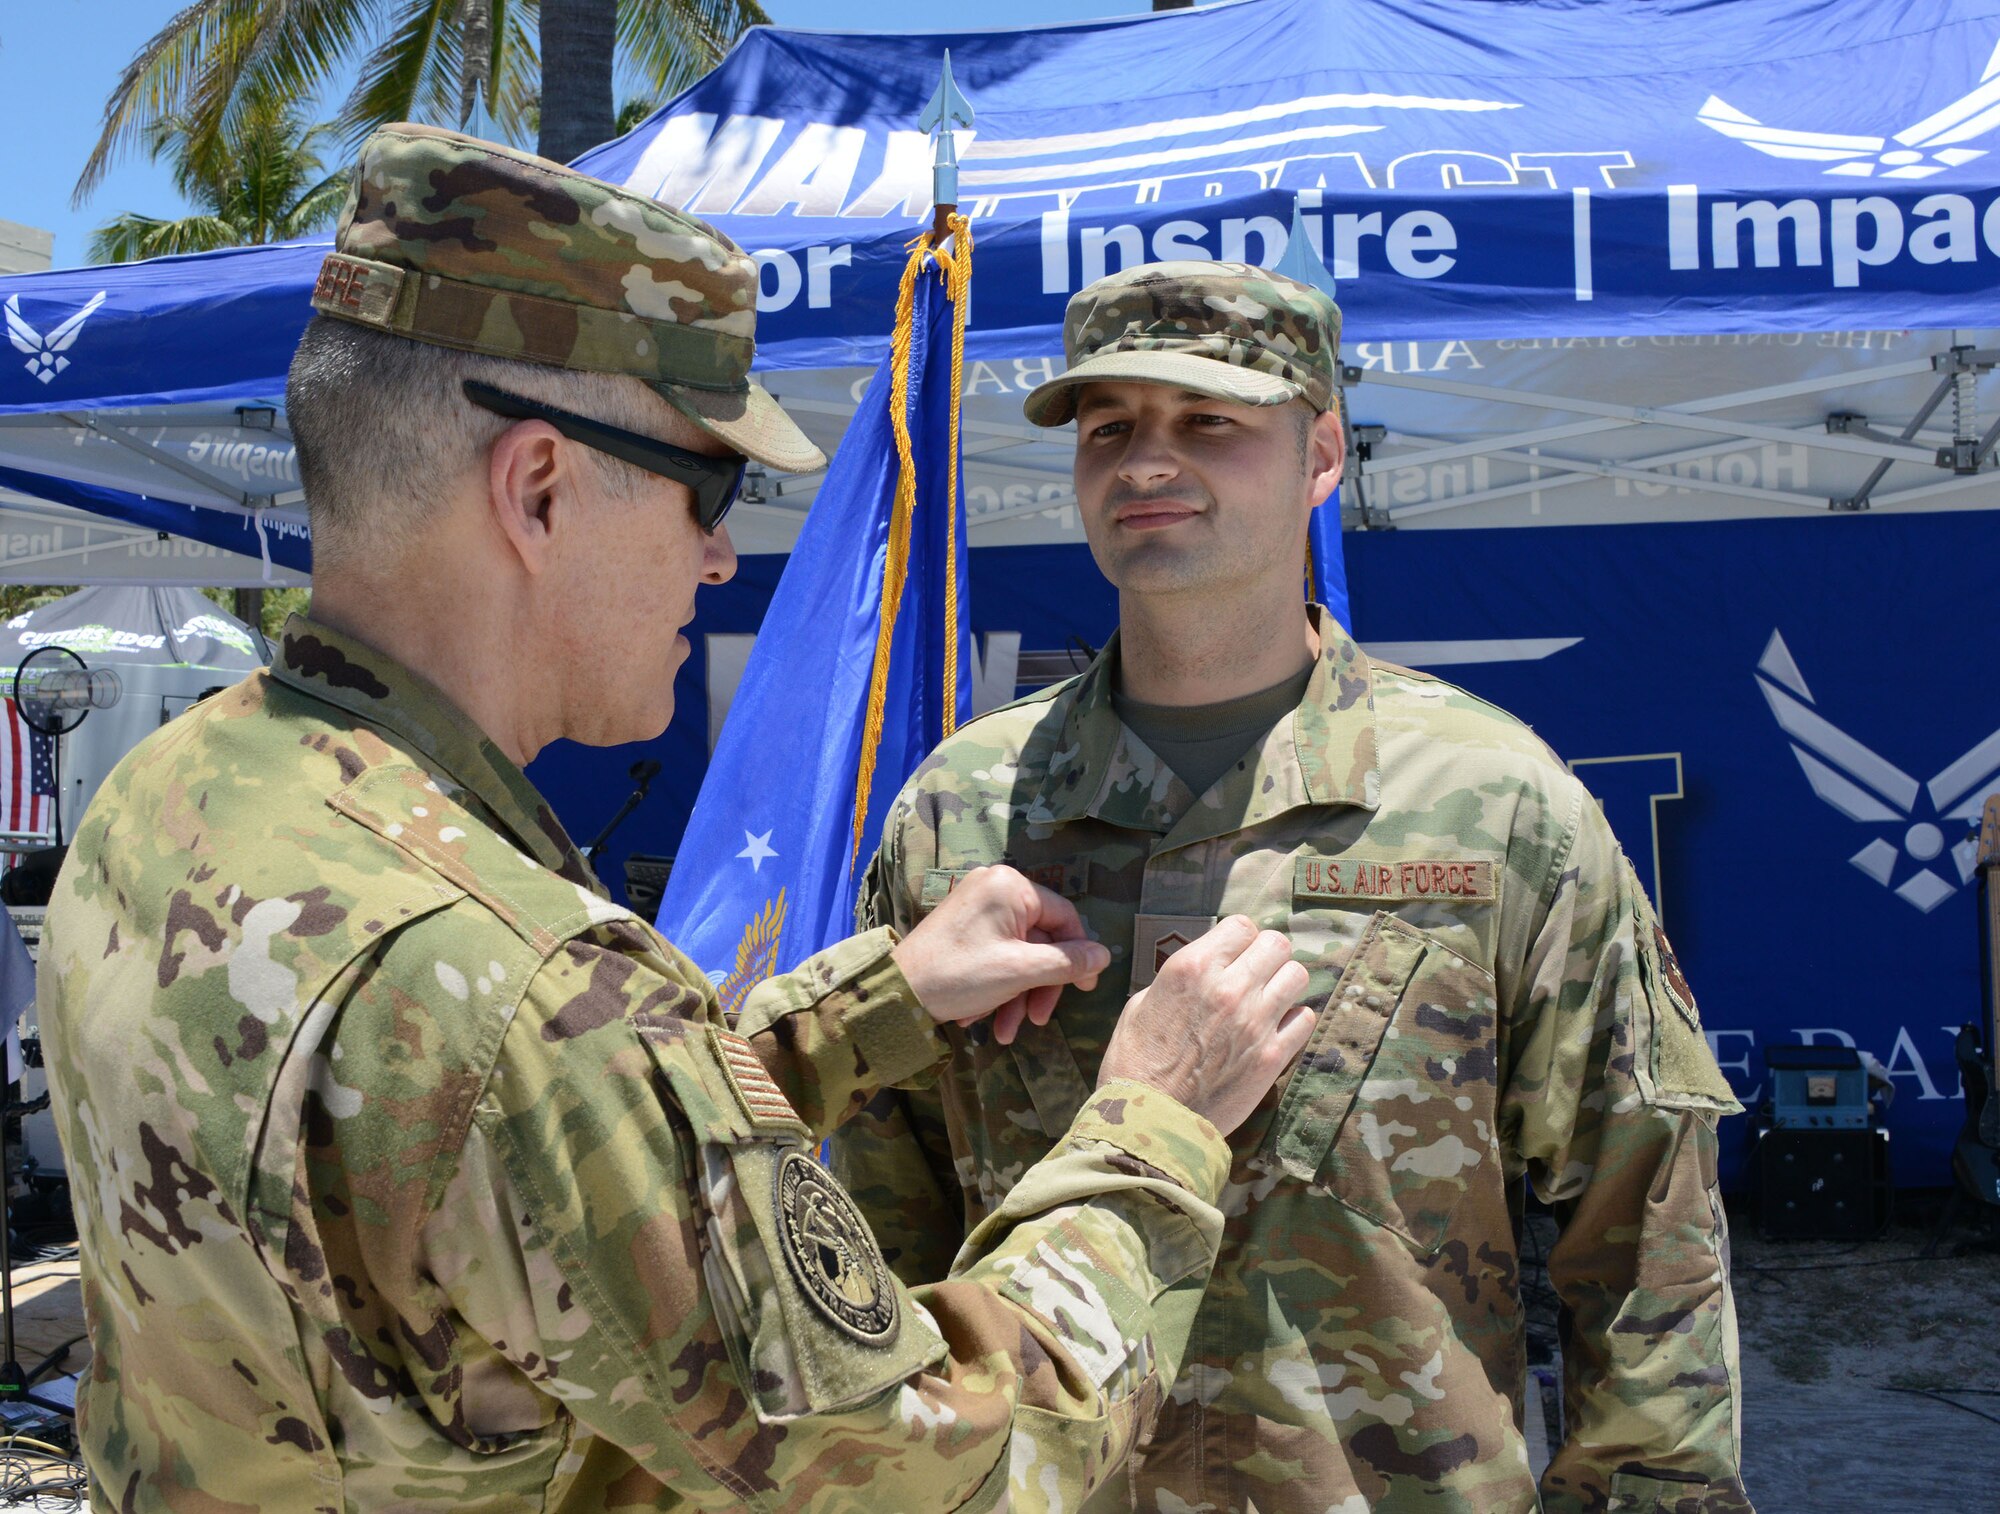 Lt. Gen. Thomas Bussiere, U.S. Strategic Command deputy commander, pins master sergeant rank on Doryan Leterrier, 333rd Recruiting Squadron Enlisted Accessions recruiter, during a promotion ceremony on the beach at the Miami Beach Air Show, May 28, 2021.